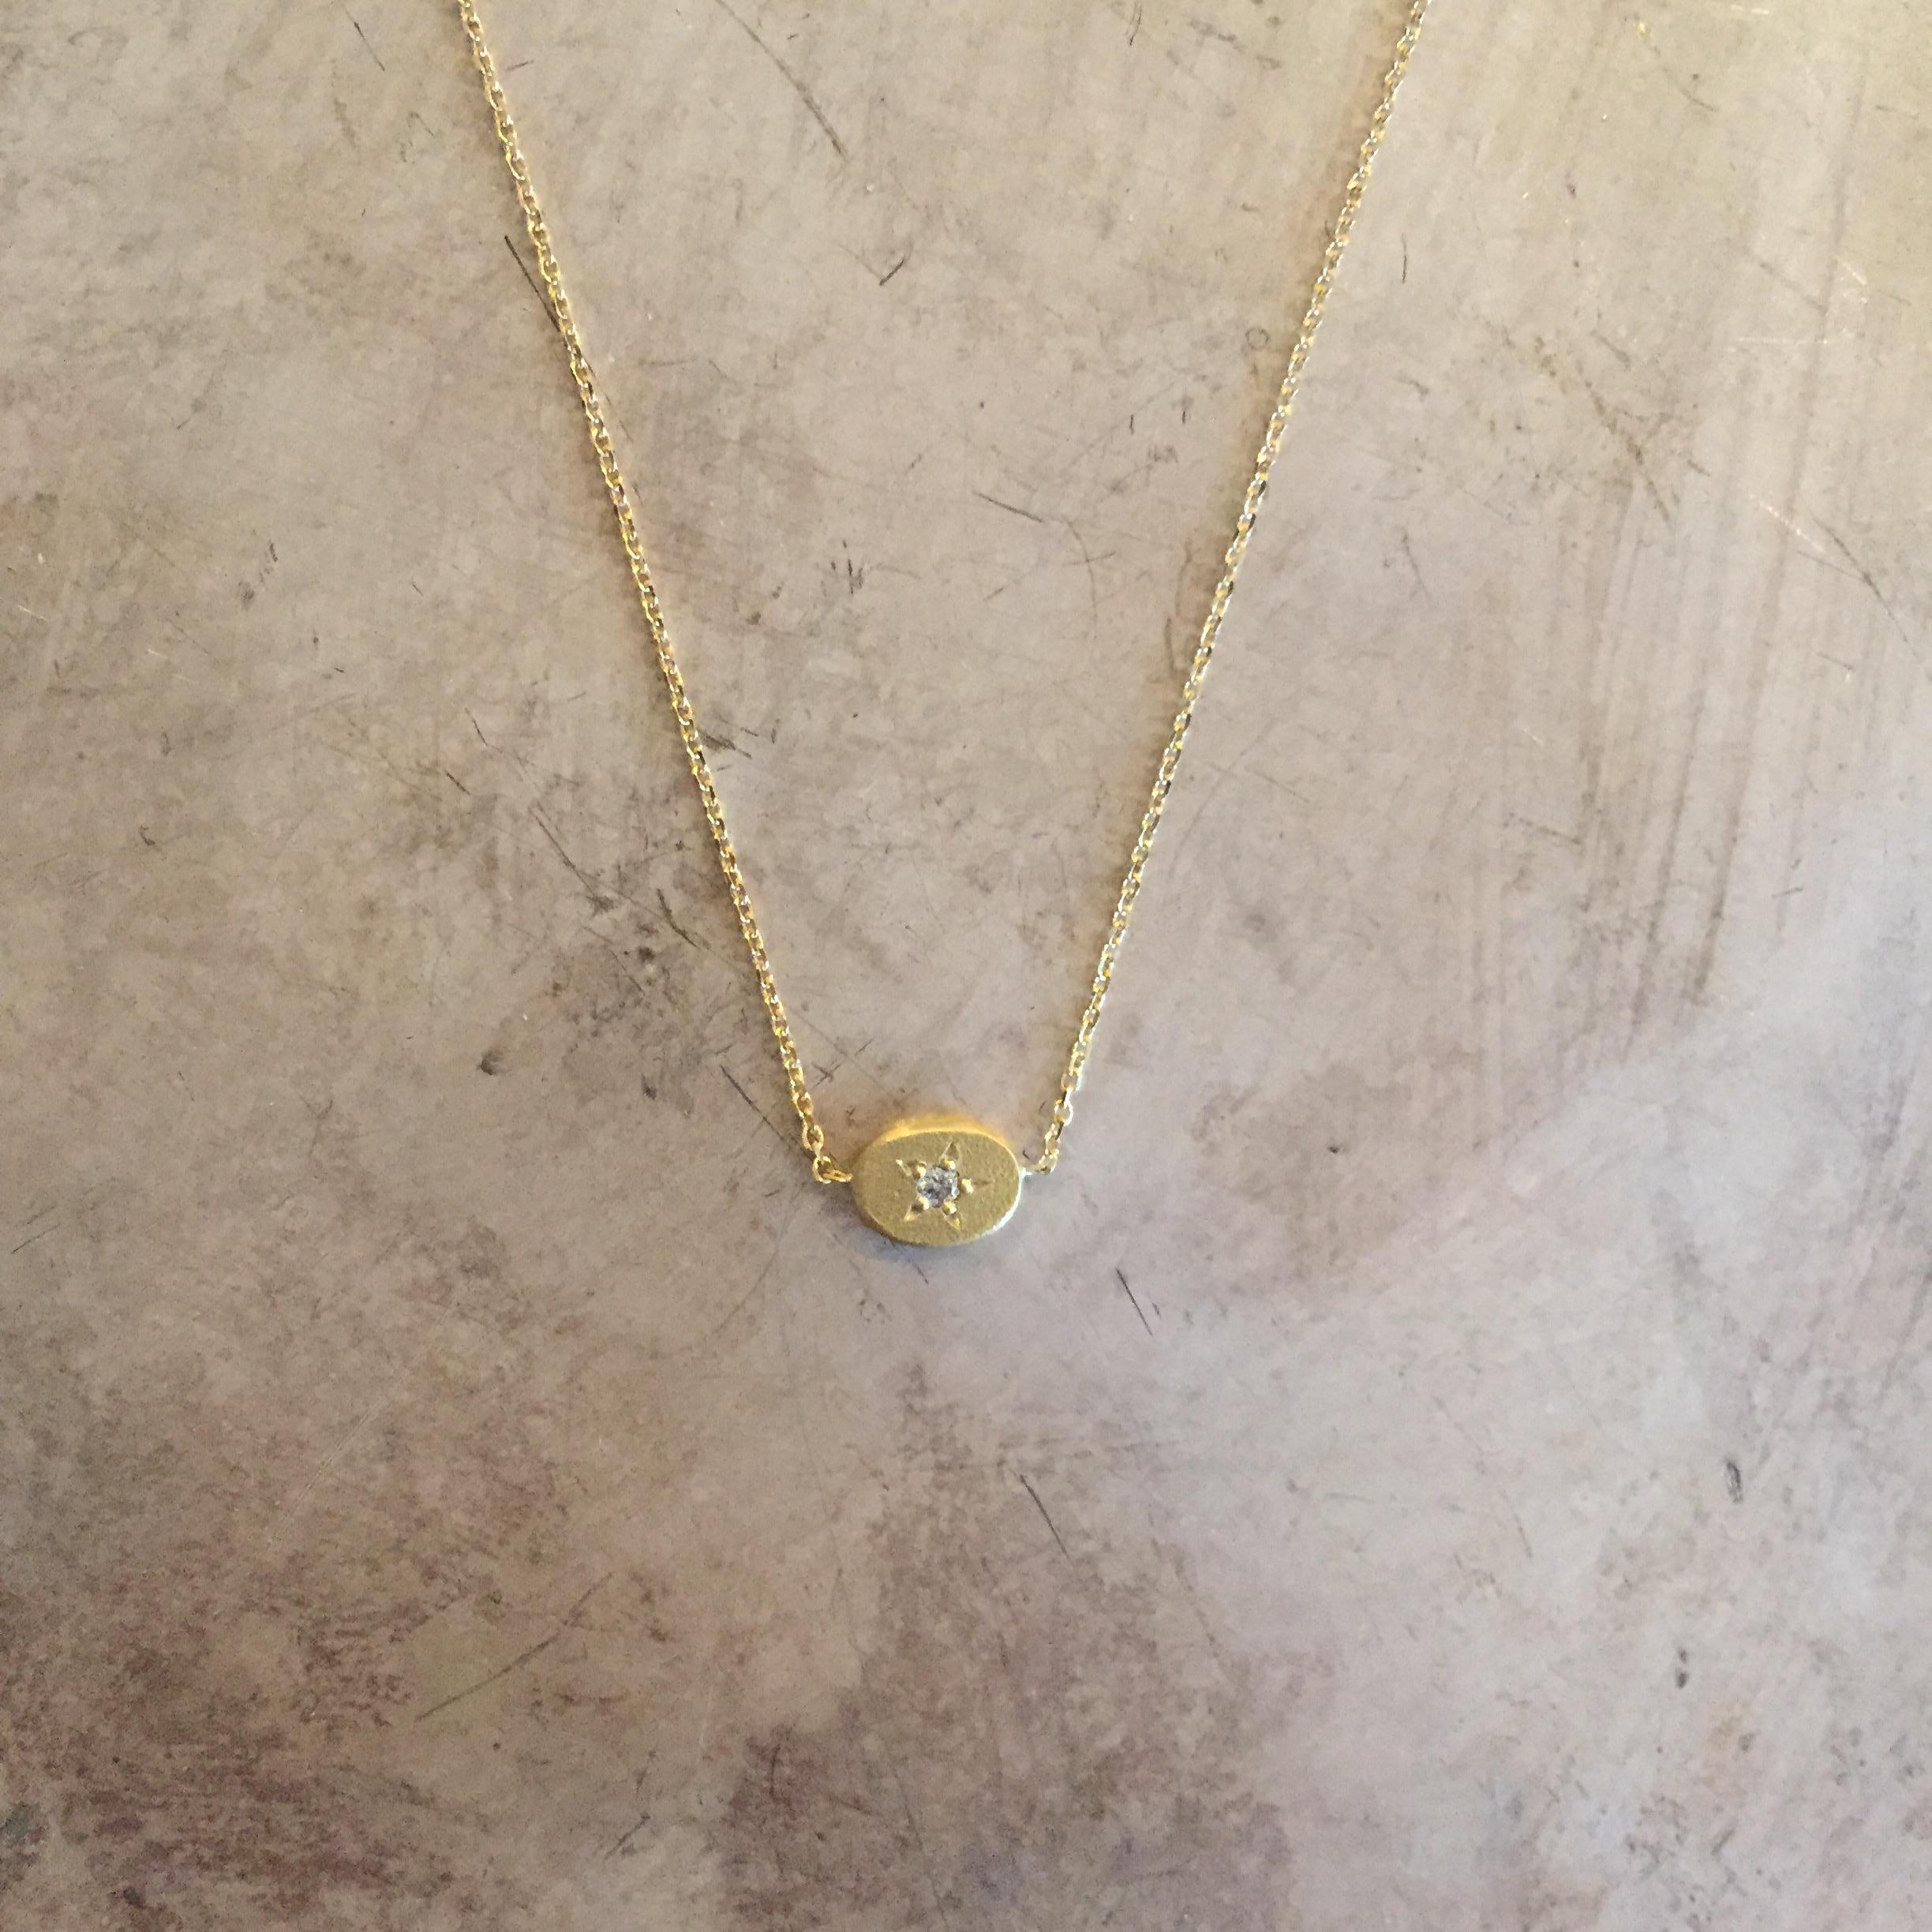 This classic piece from Sweet Pea's popular Starry Starry Night collection is simply timeless. Made from 18k yellow gold fine diamond cut chain this necklace is 40cm long with a sparking diamond set star pebble drop pendant. The horizontal oval